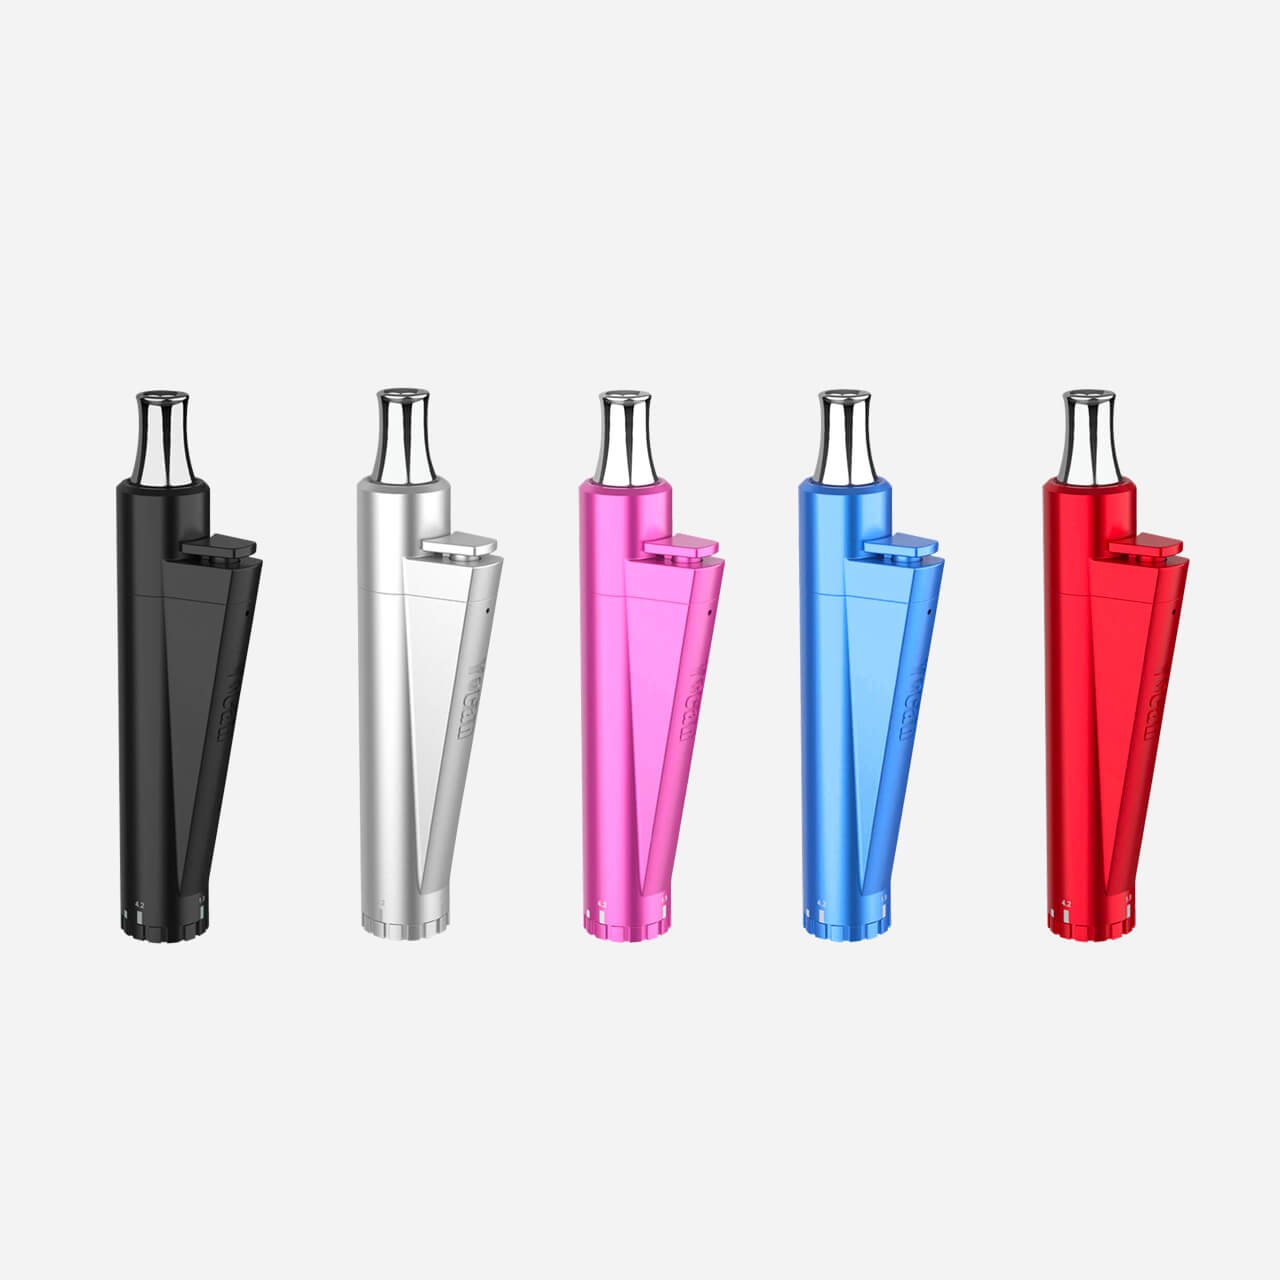 Yocan Lit Wax Pen Black&amp;Silver&amp;Rosy&amp;Blue&amp;Red - INHALCO